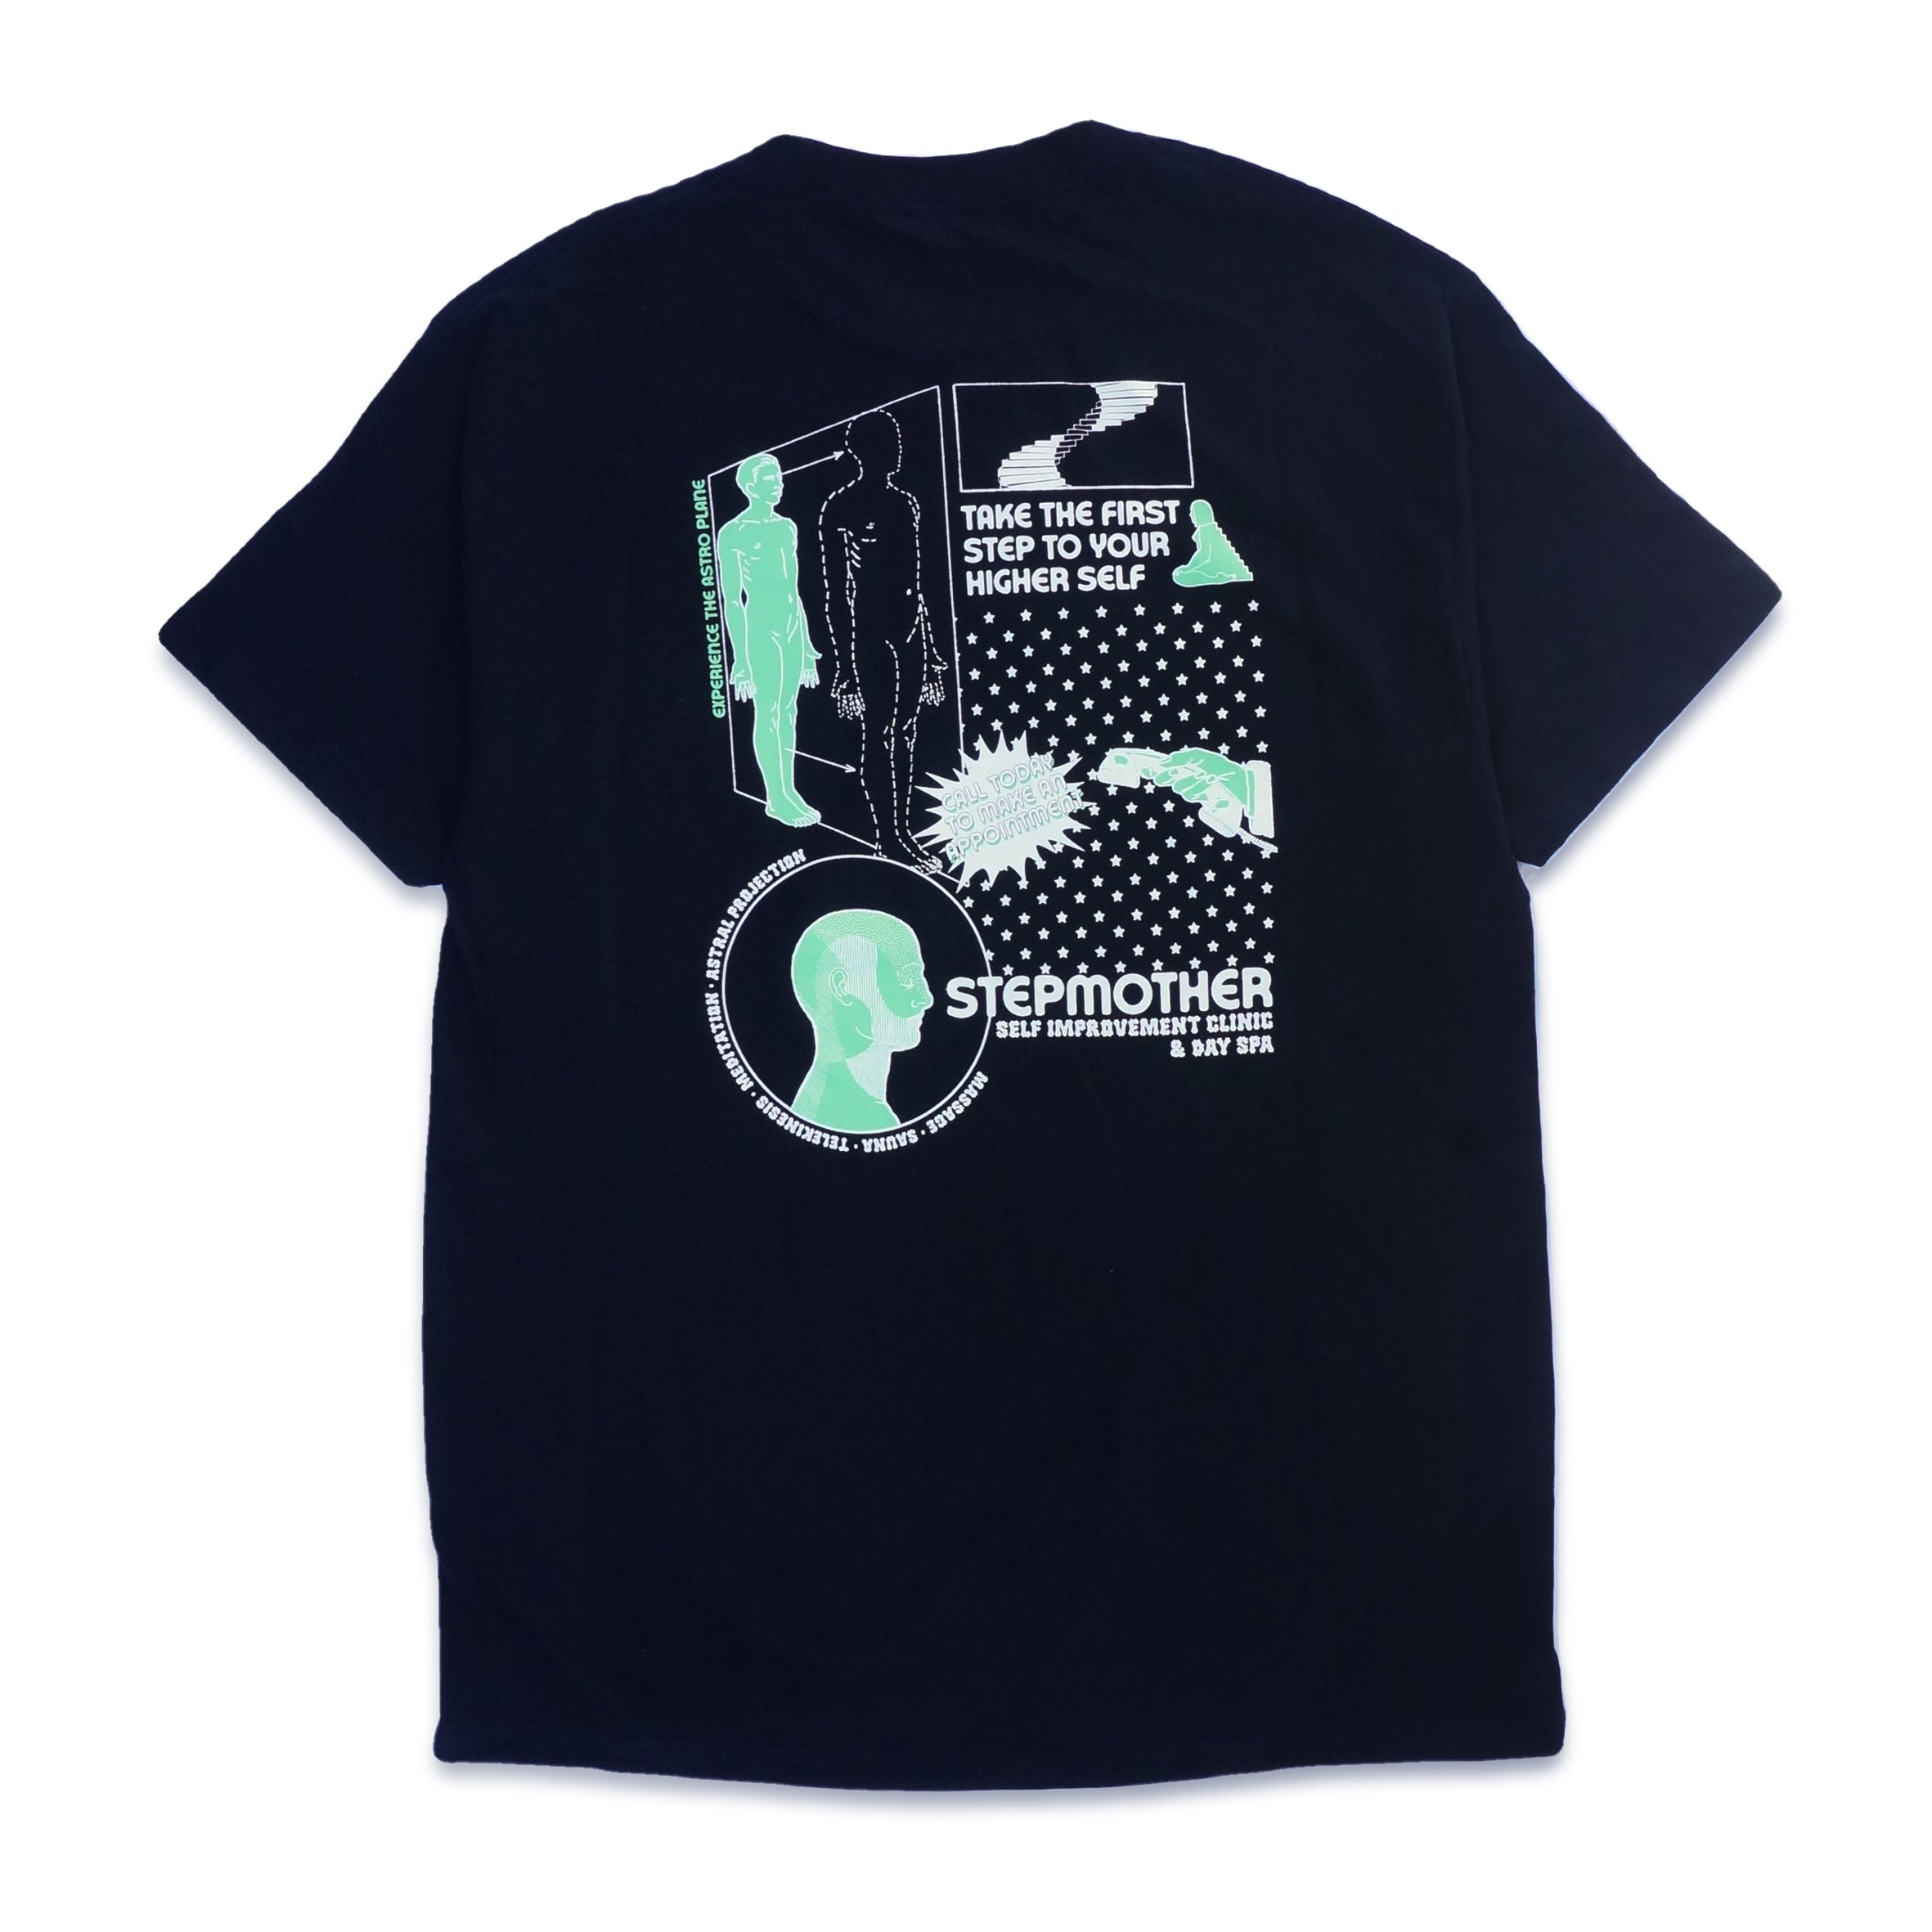 Day Spa T-shirt - Navy